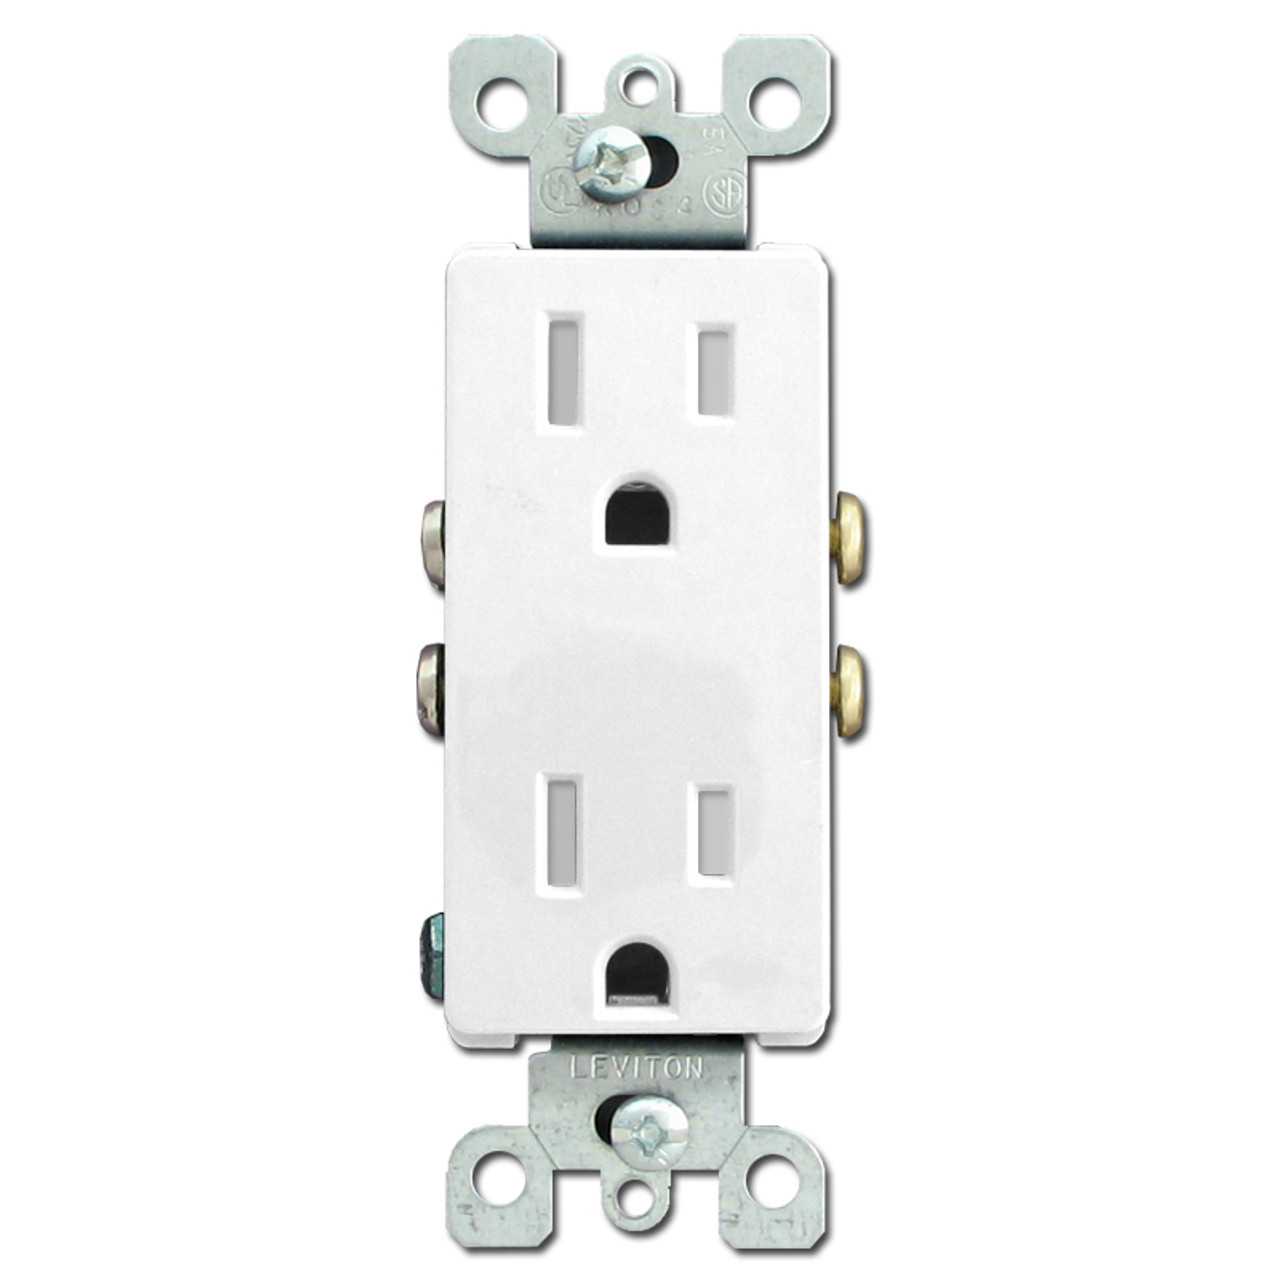 https://cdn11.bigcommerce.com/s-wlejmk/images/stencil/1280x1280/products/7206/28977/decora-outlet-receptacle-15a-tamper-resistant-white-lev-t5325-w__23464.1609805936.jpg?c=2